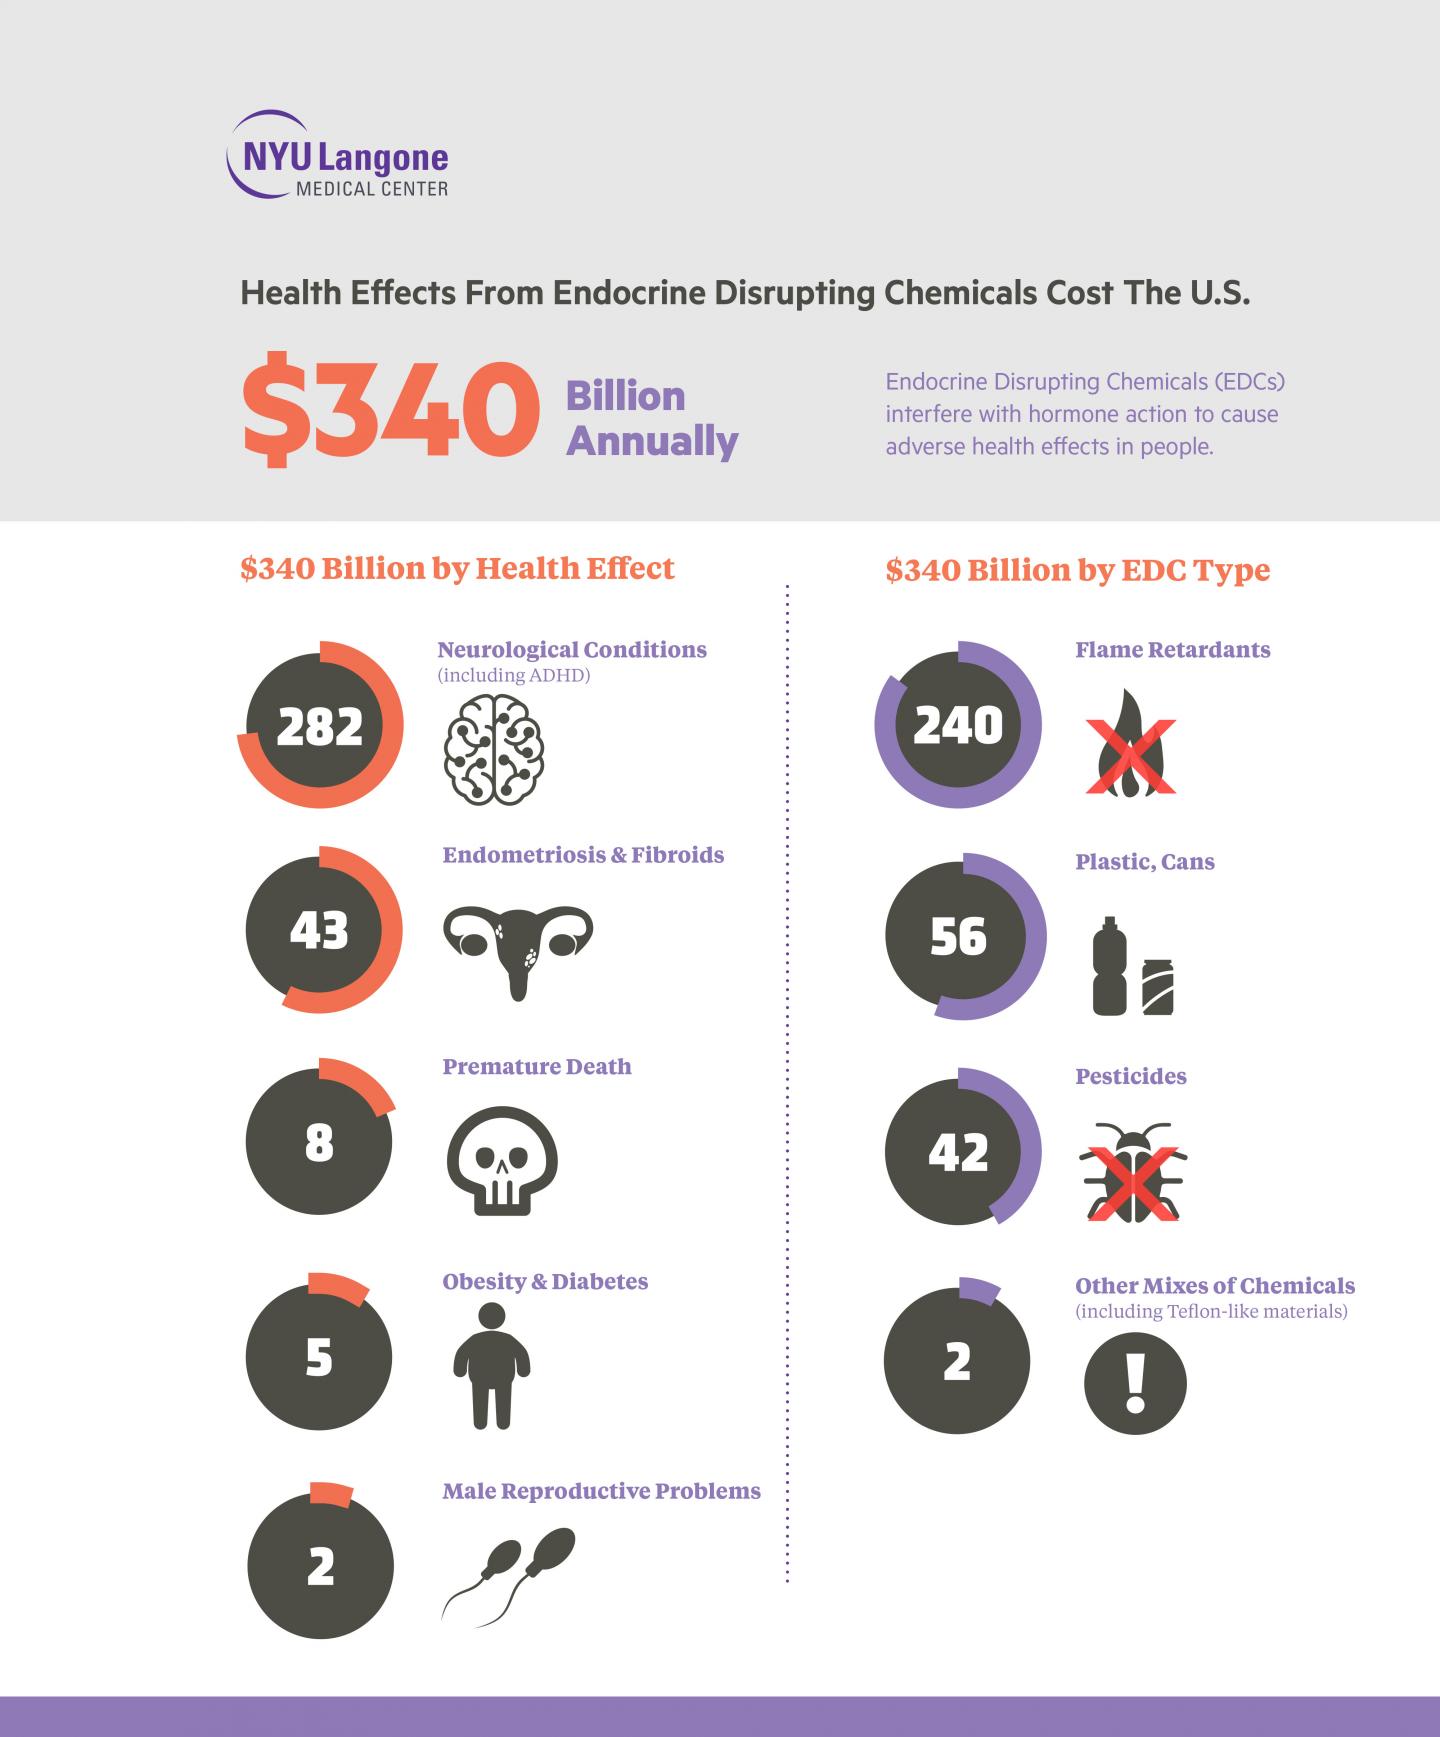 Health Effects From Endocrine Disrupting Chemicals